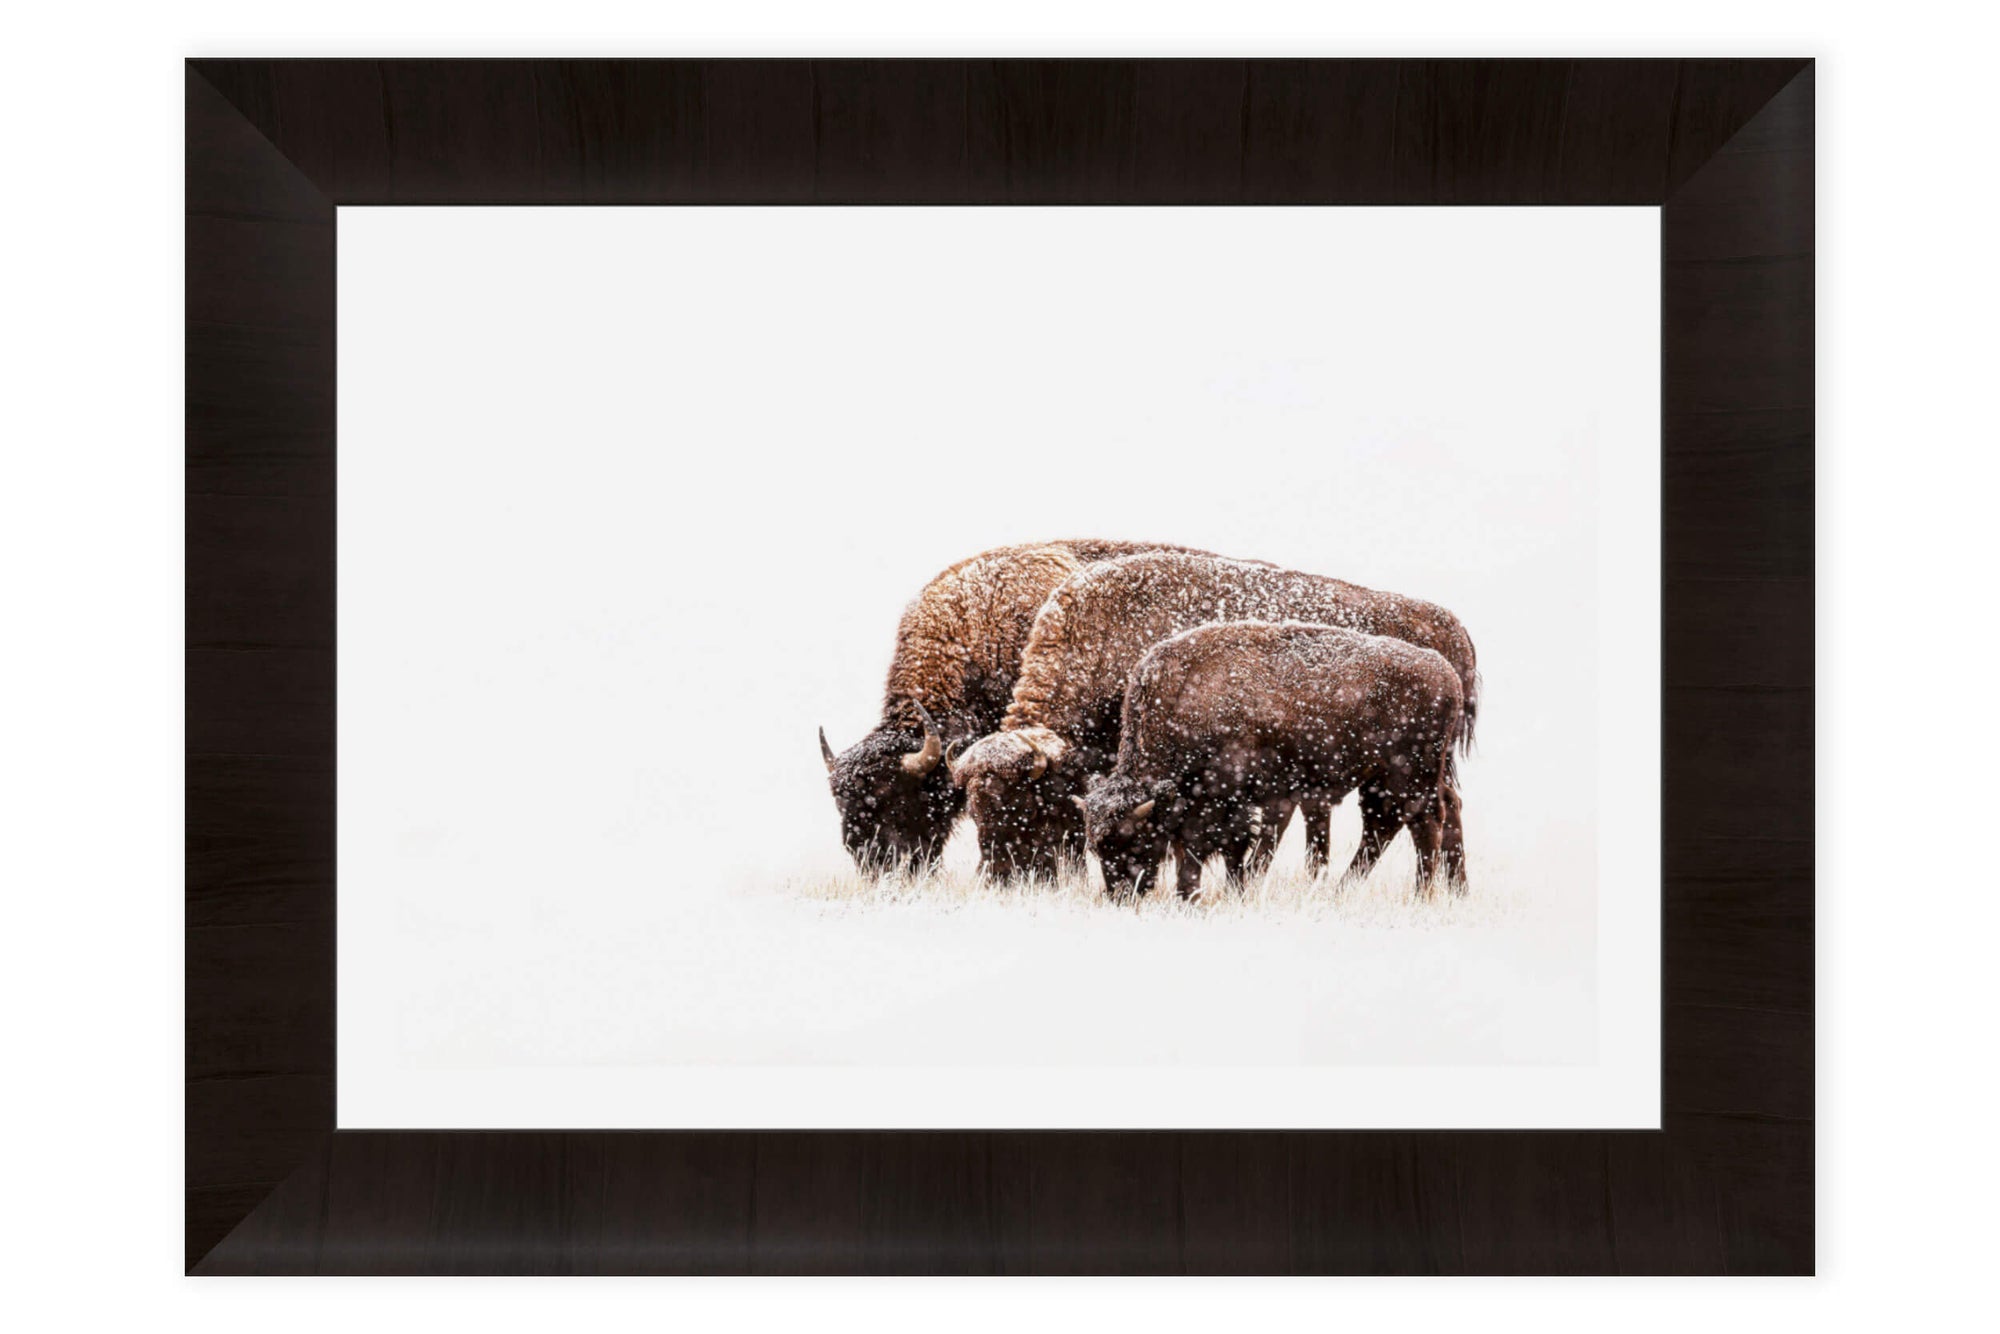 A framed picture of bison in the snow at Rocky Mountain Wildlife Arsenal near Denver.